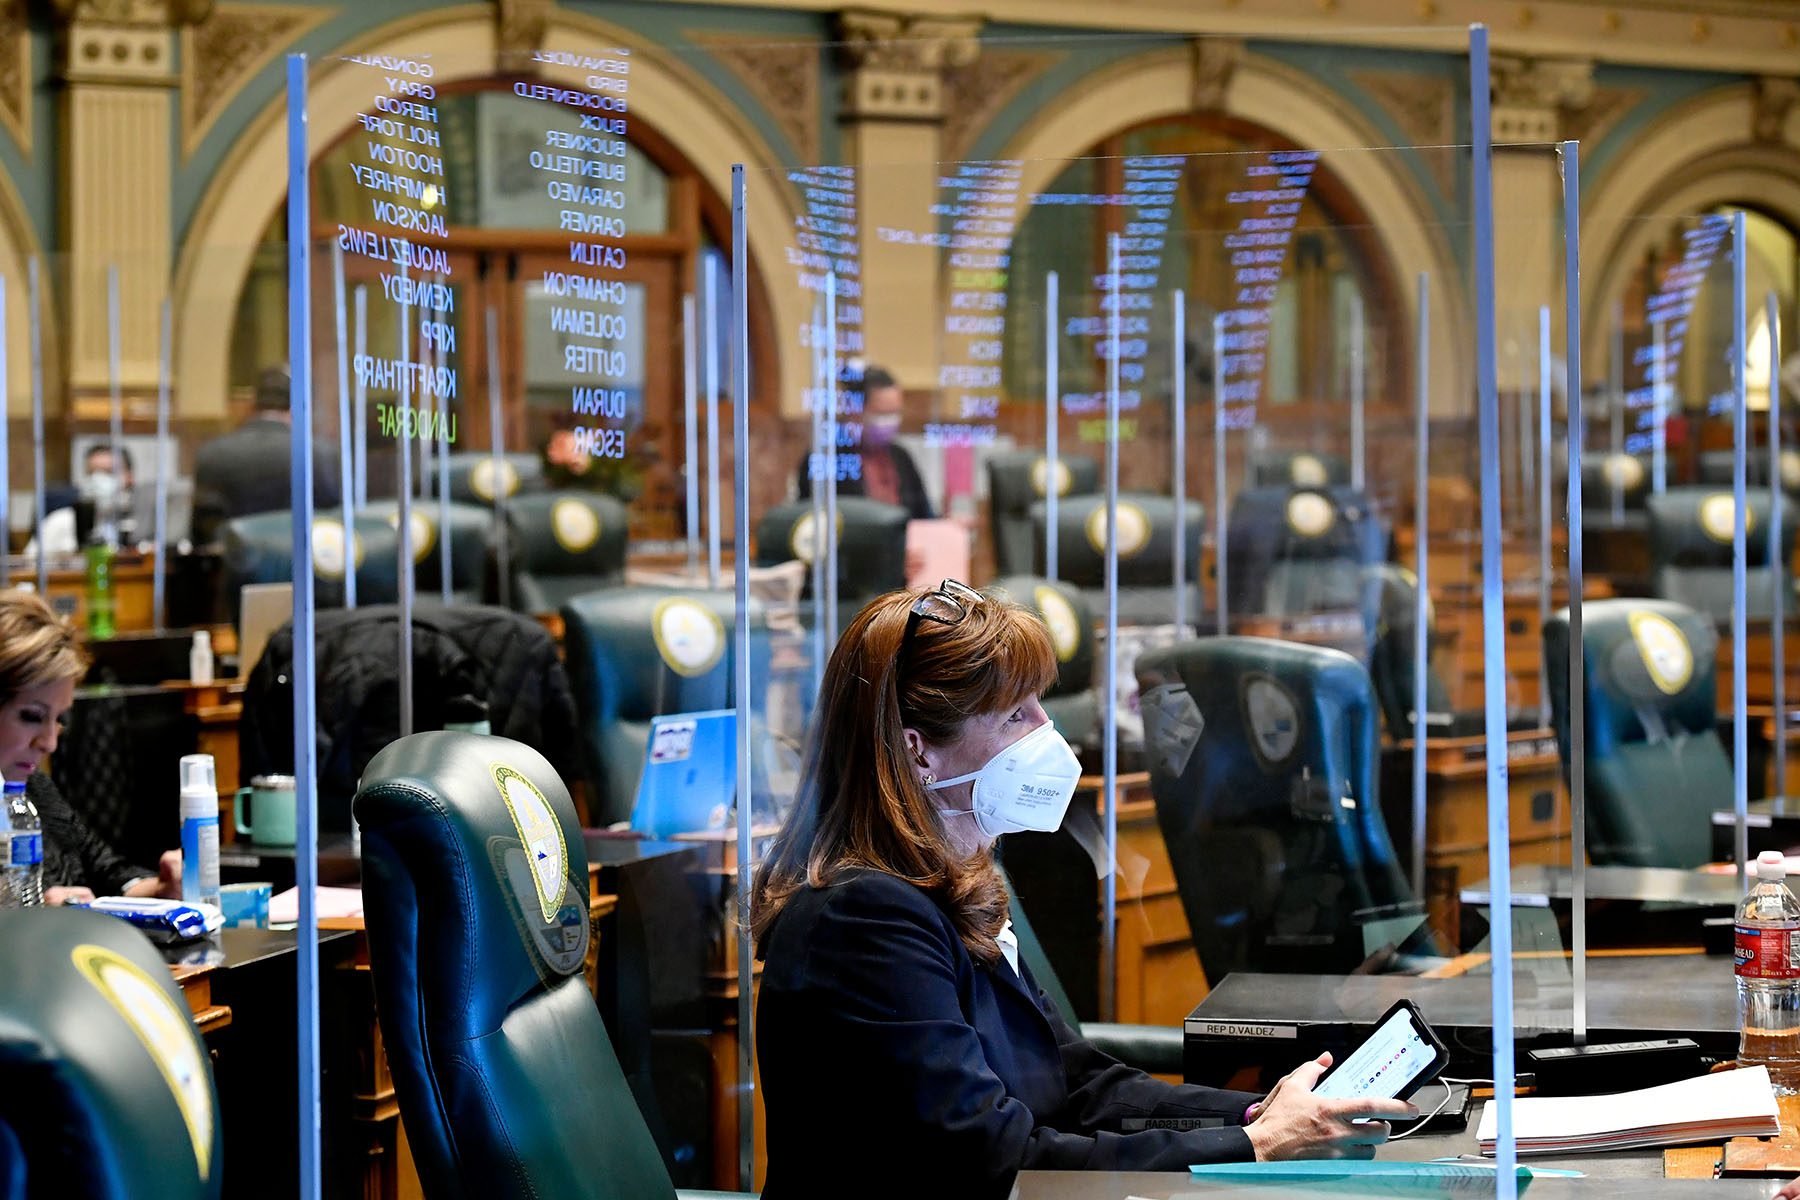 Rep. Julie McCluskie wears a face mask and is surrounded by protective plastic barriers reflecting the names of Colorado representatives from the monitor on the wall in the House chambers at the Colorado State Capitol during an emergency legislative session.